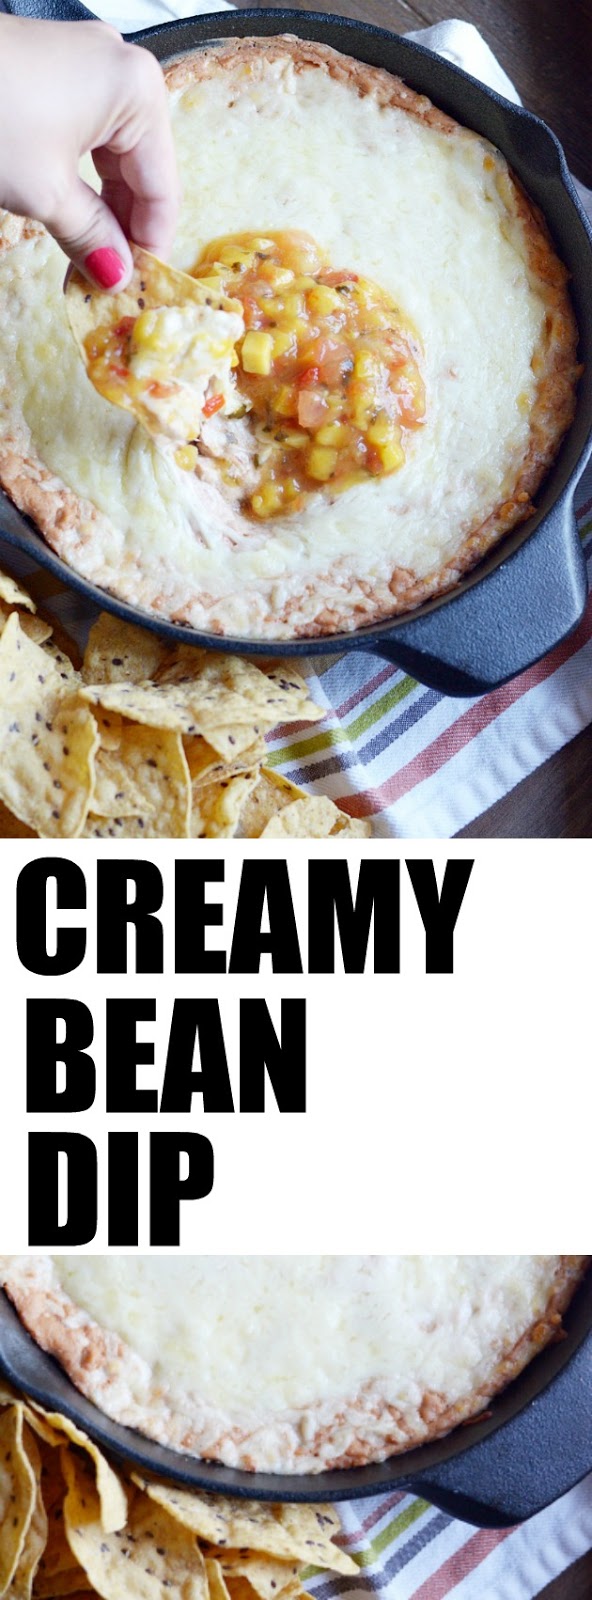 Completely addiction bean dip made with cream cheese, mozzarella, taco seasoning, and (of course) refried beans! We love to eat ours with mango salsa on top.